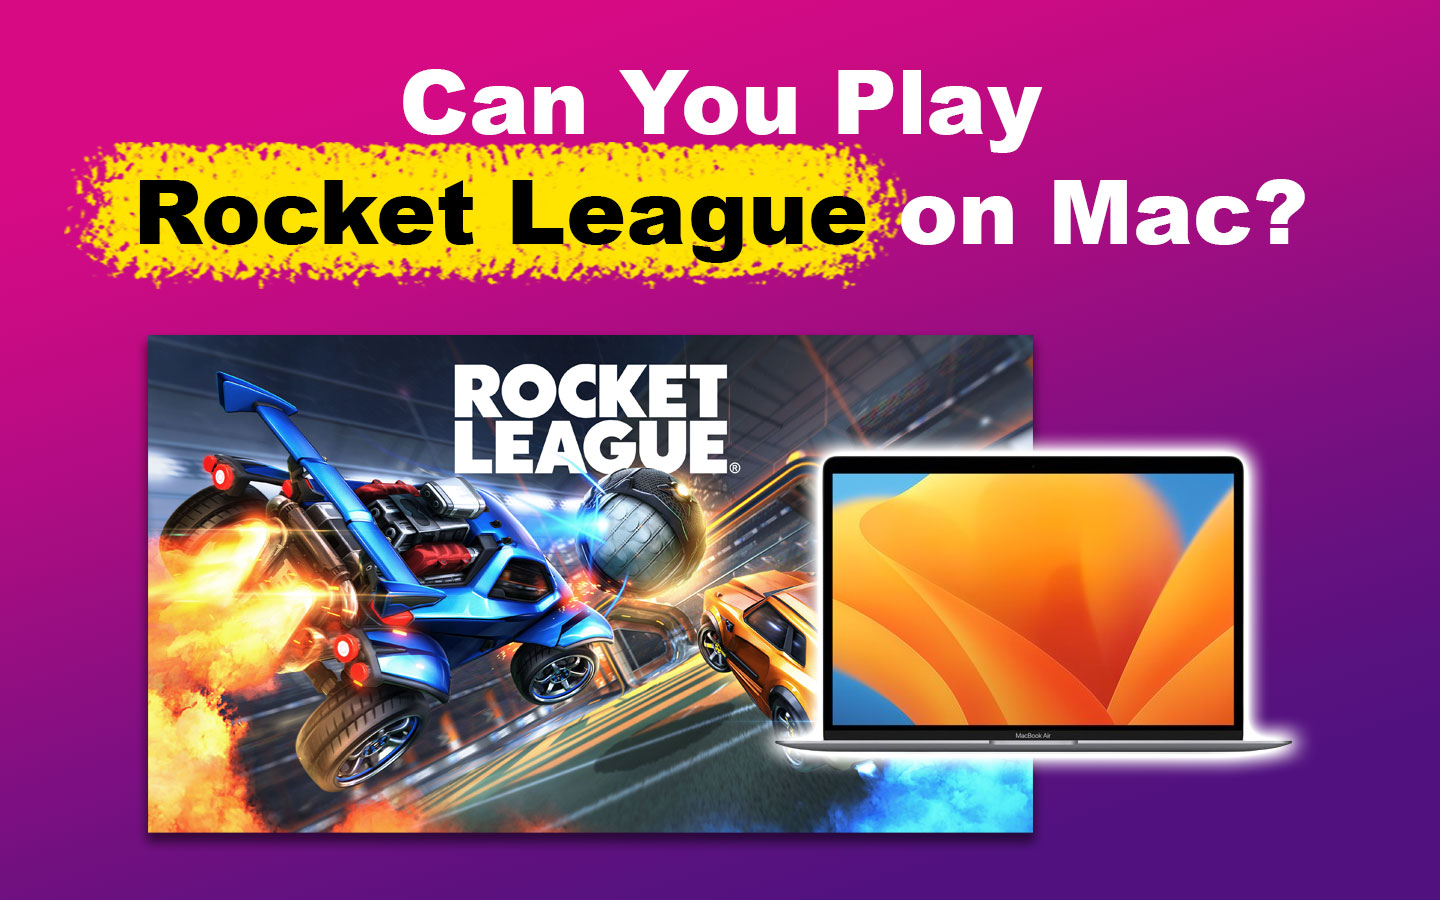 Can You Play Rocket League on Mac